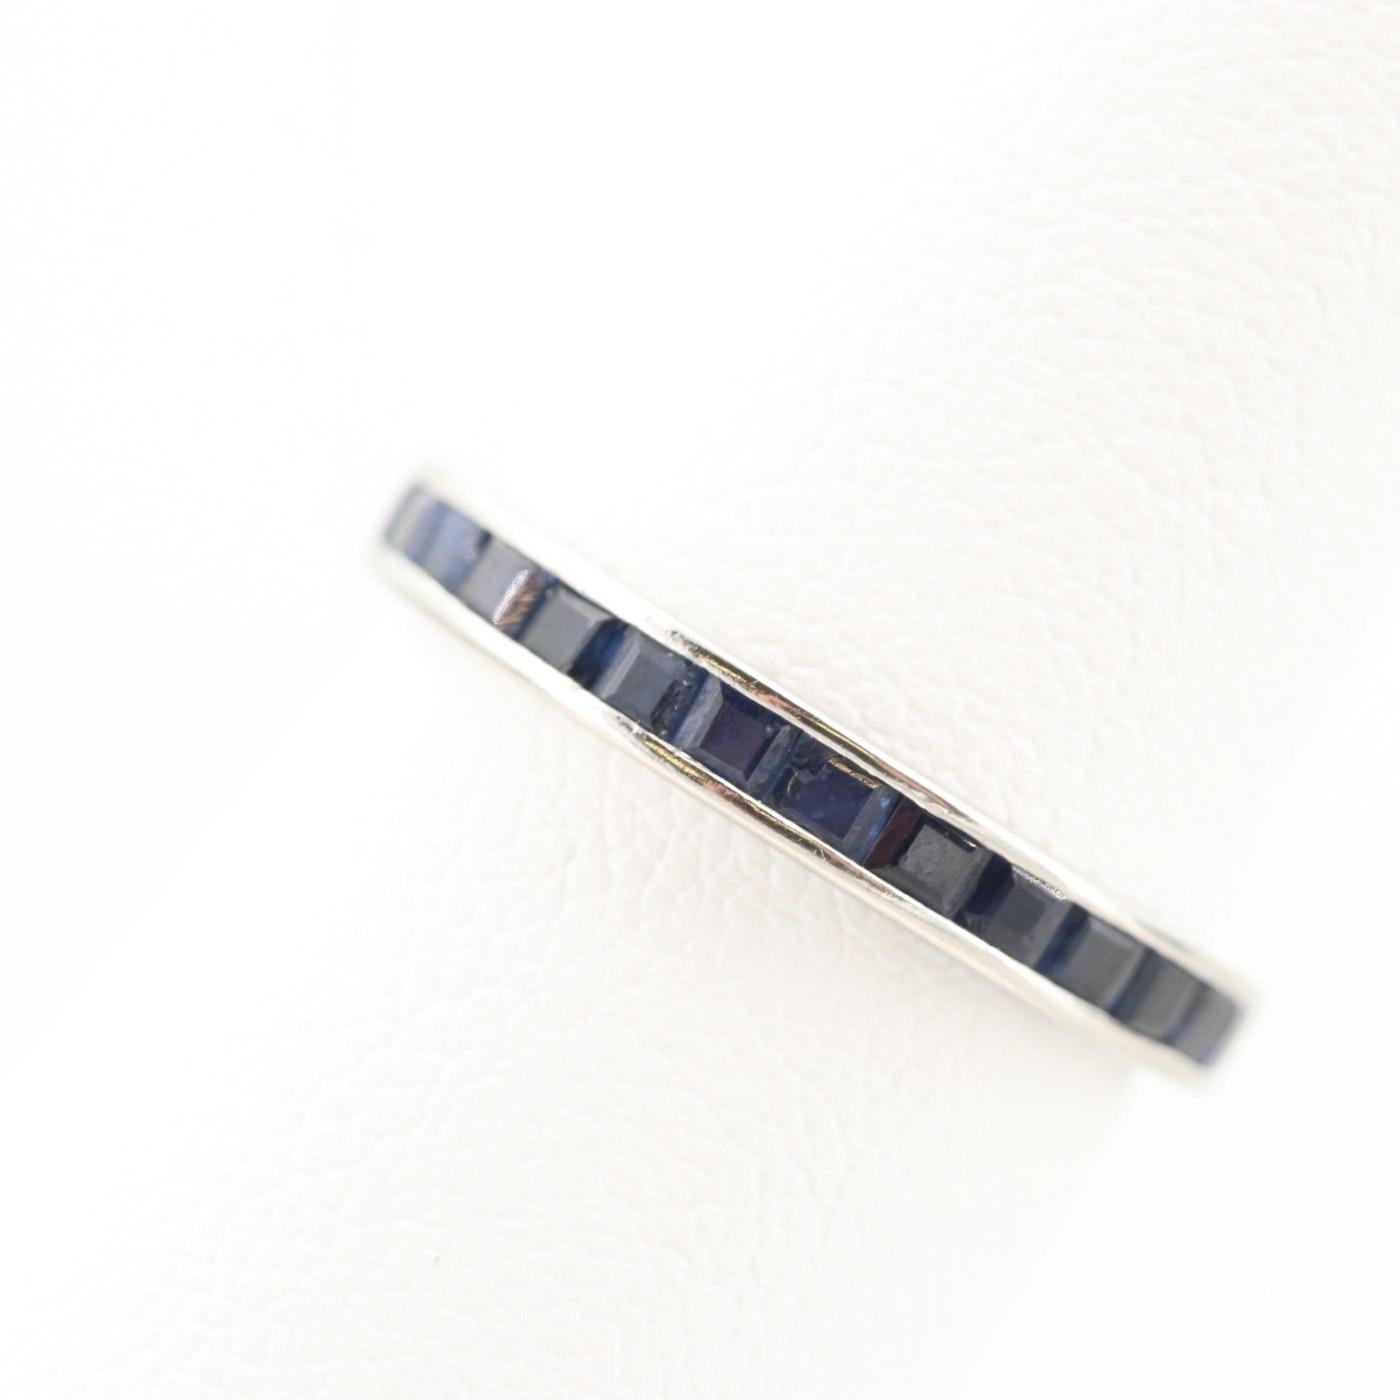 Description: 
This piece is a 1930s Art Deco style Platinum wedding band with 1.1 cttw French Cut natural sapphires! A perfect band with a pop of color with beautiful blue sapphires that will pair with your engagement ring on your special day!!